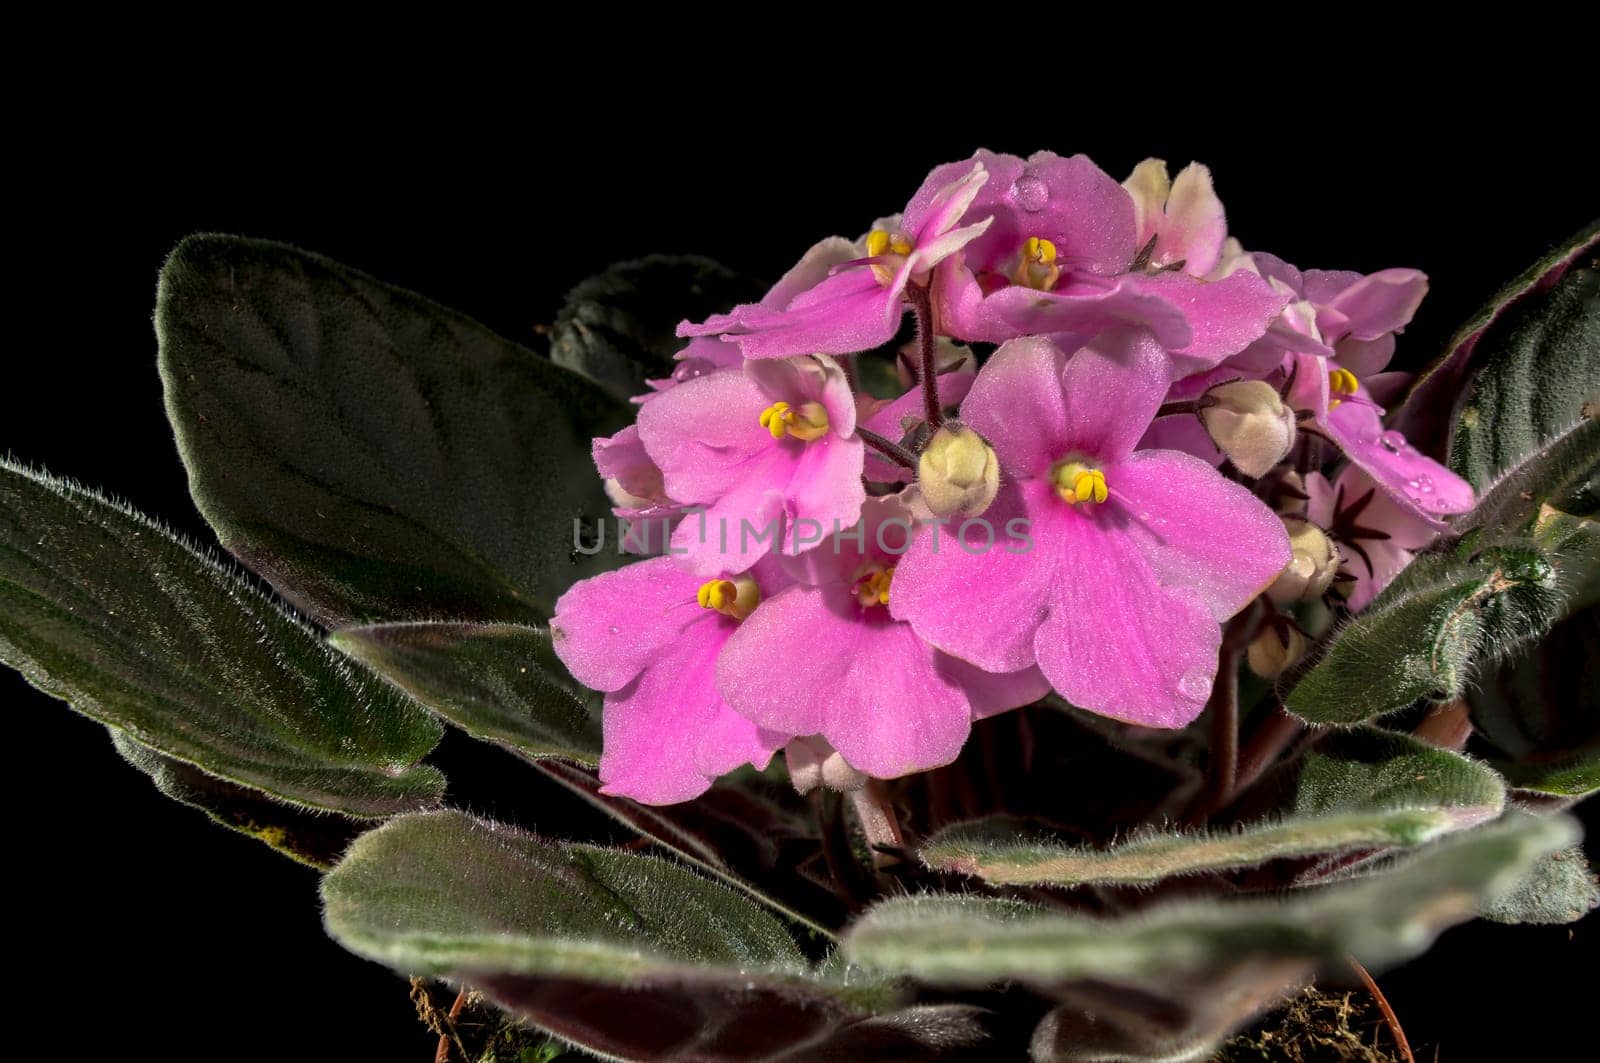 Blossoming pink viola flowers on a black background close up